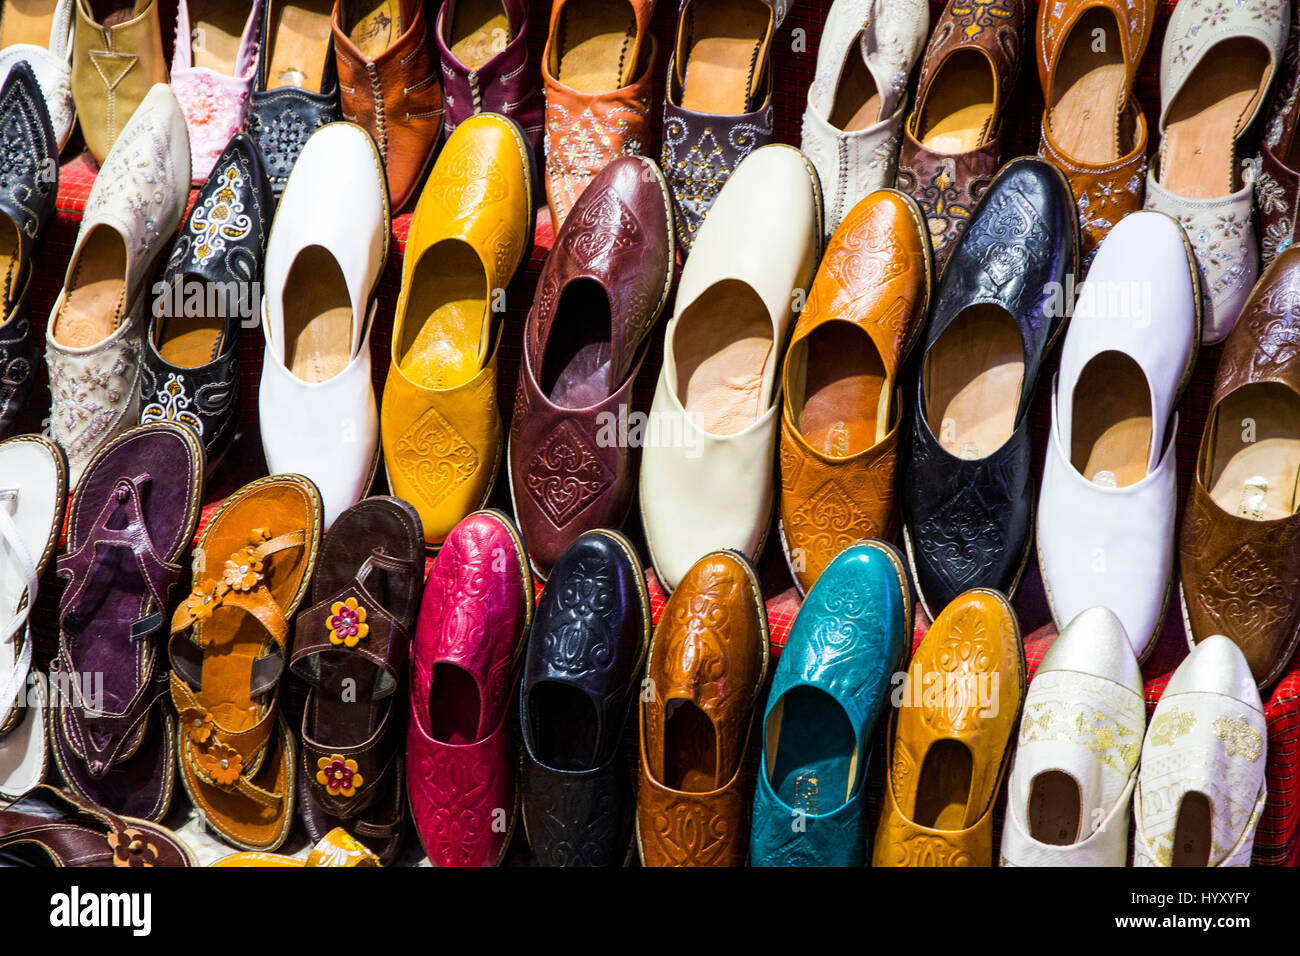 This souk, or shop, displays an array of colorful handmade shoes and sandals in the Medina of Tunis, Tunisia. Stock Photo